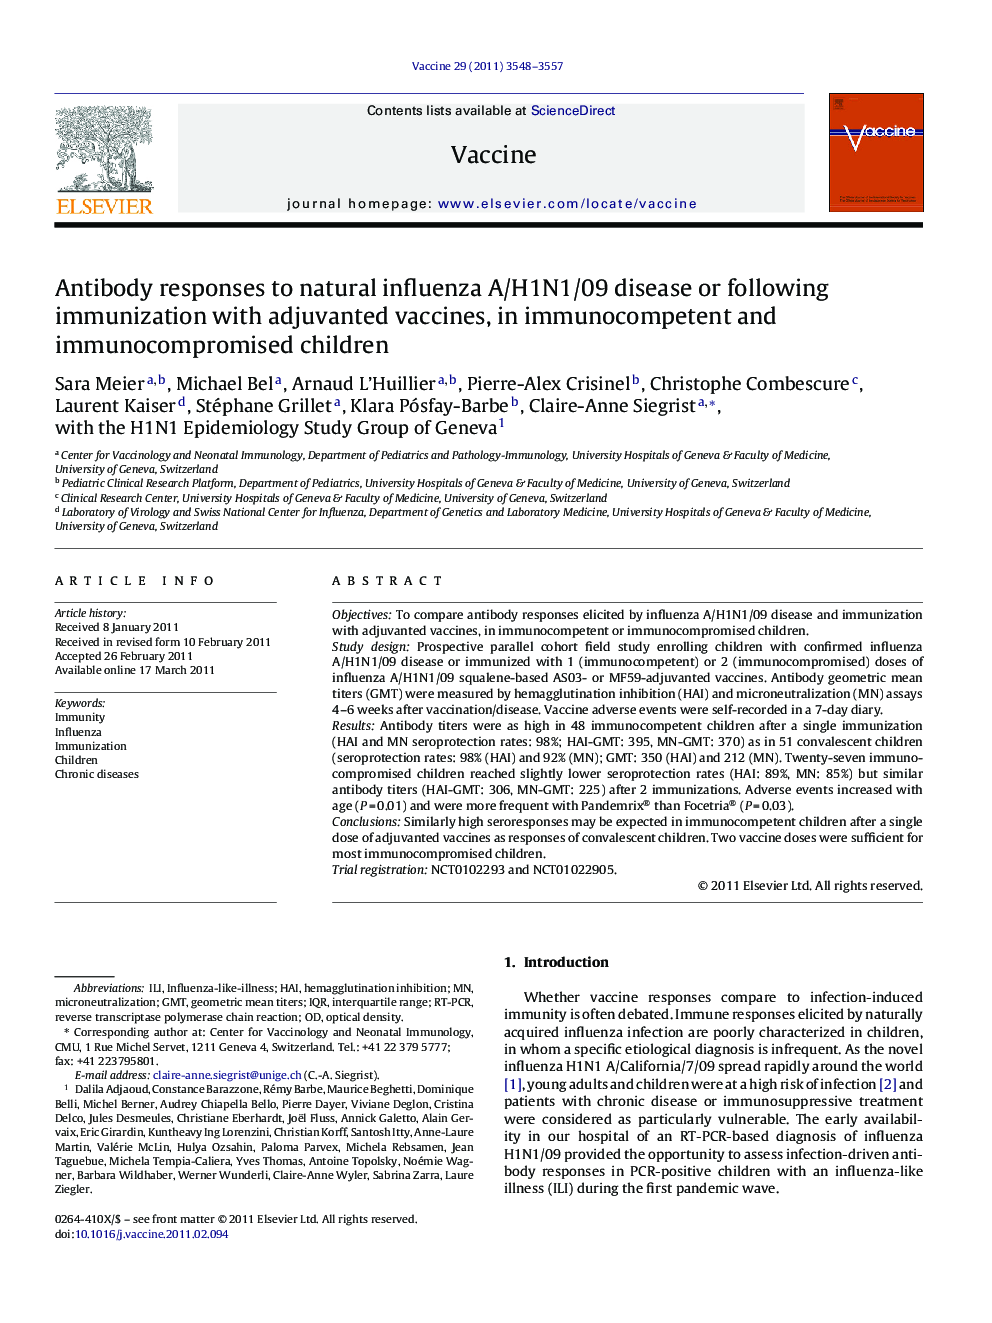 Antibody responses to natural influenza A/H1N1/09 disease or following immunization with adjuvanted vaccines, in immunocompetent and immunocompromised children